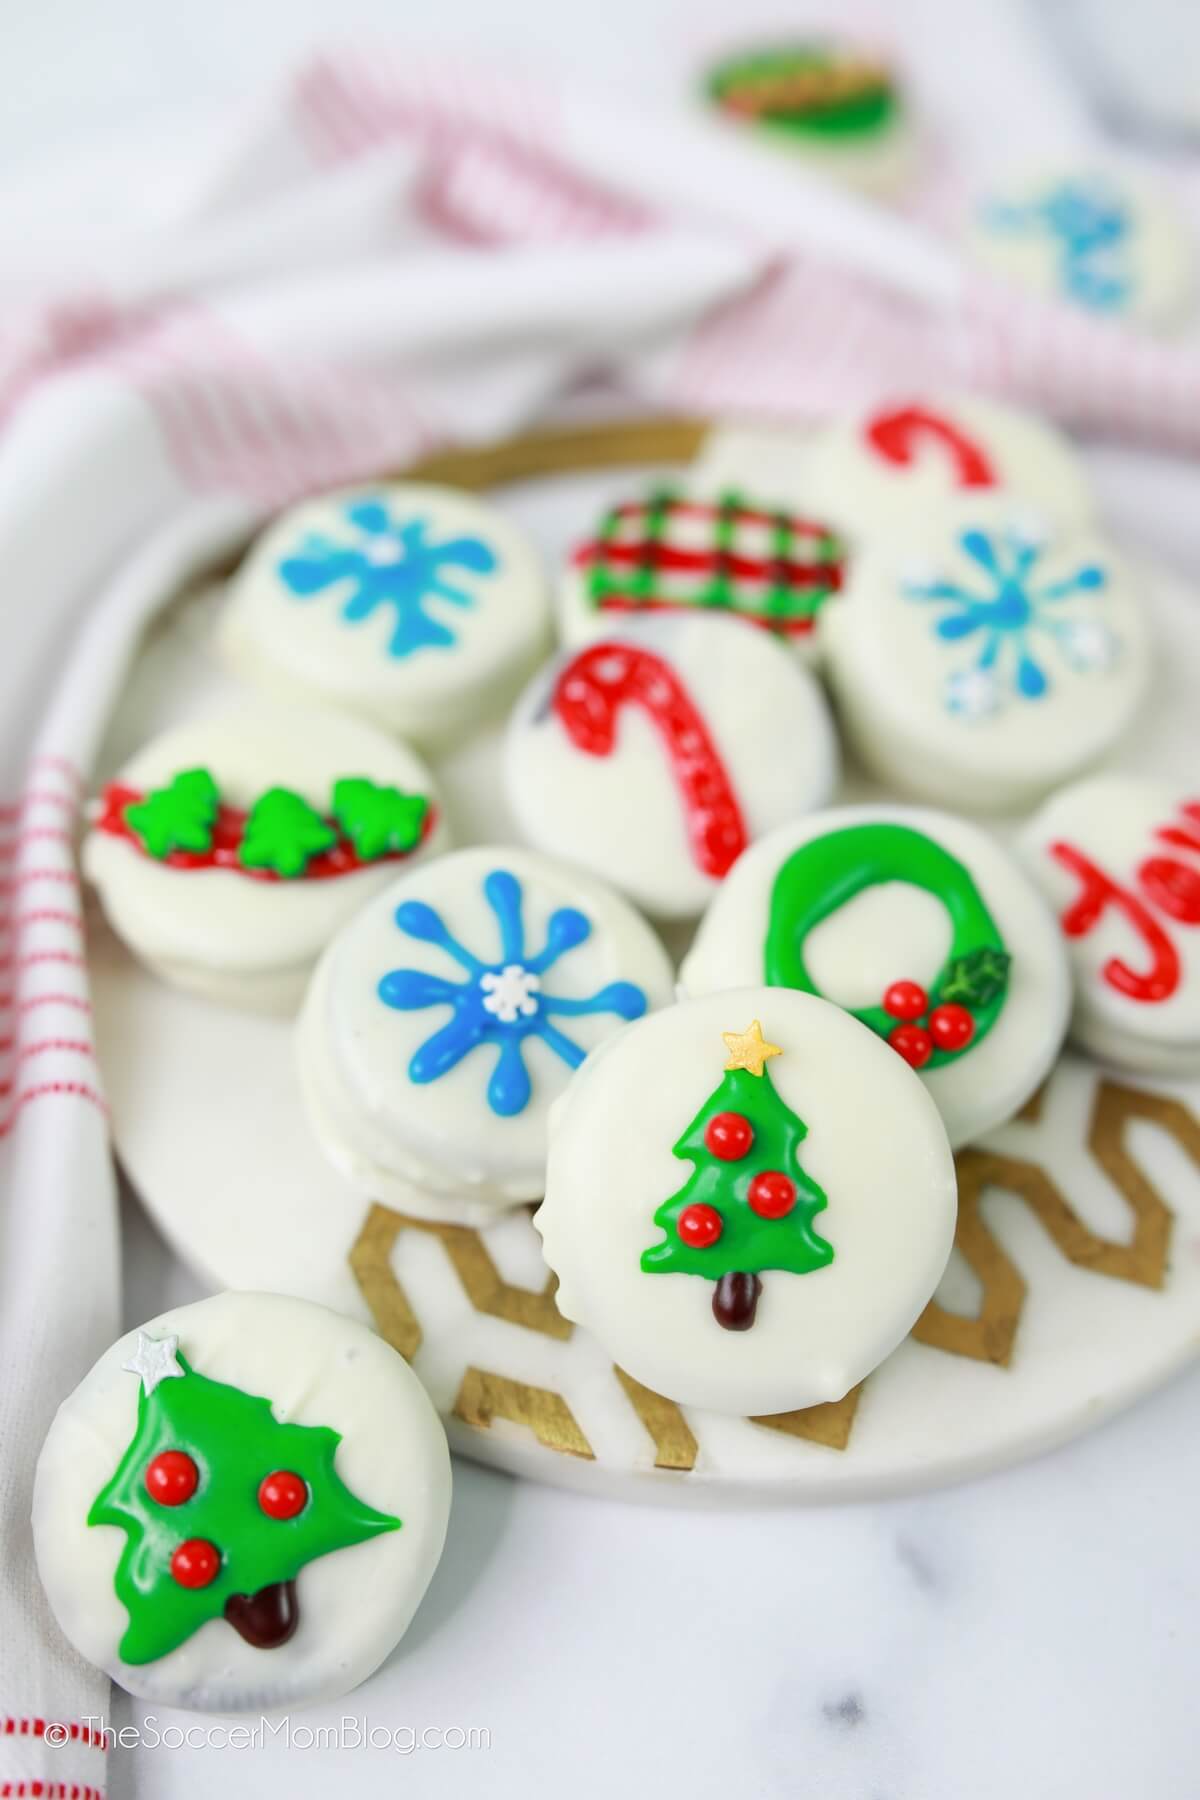 Oreos coated in white chocolate, with Christmas designs in frosting